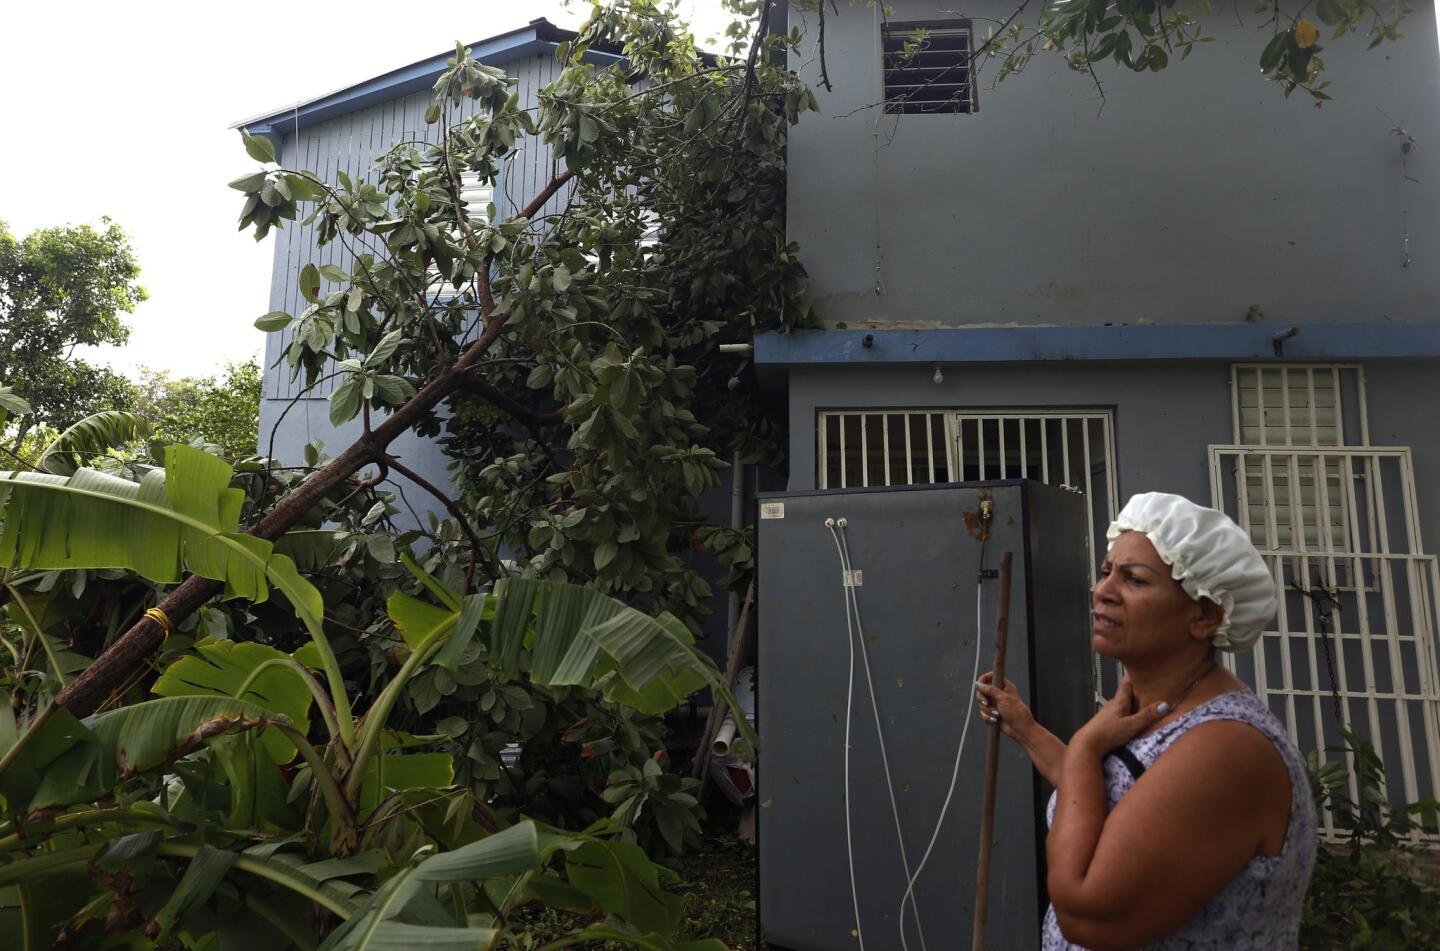 A woman cleans her house in the aftermath of Hurricane Irma, in San Juan, Puerto Rico, September 7, 2017.